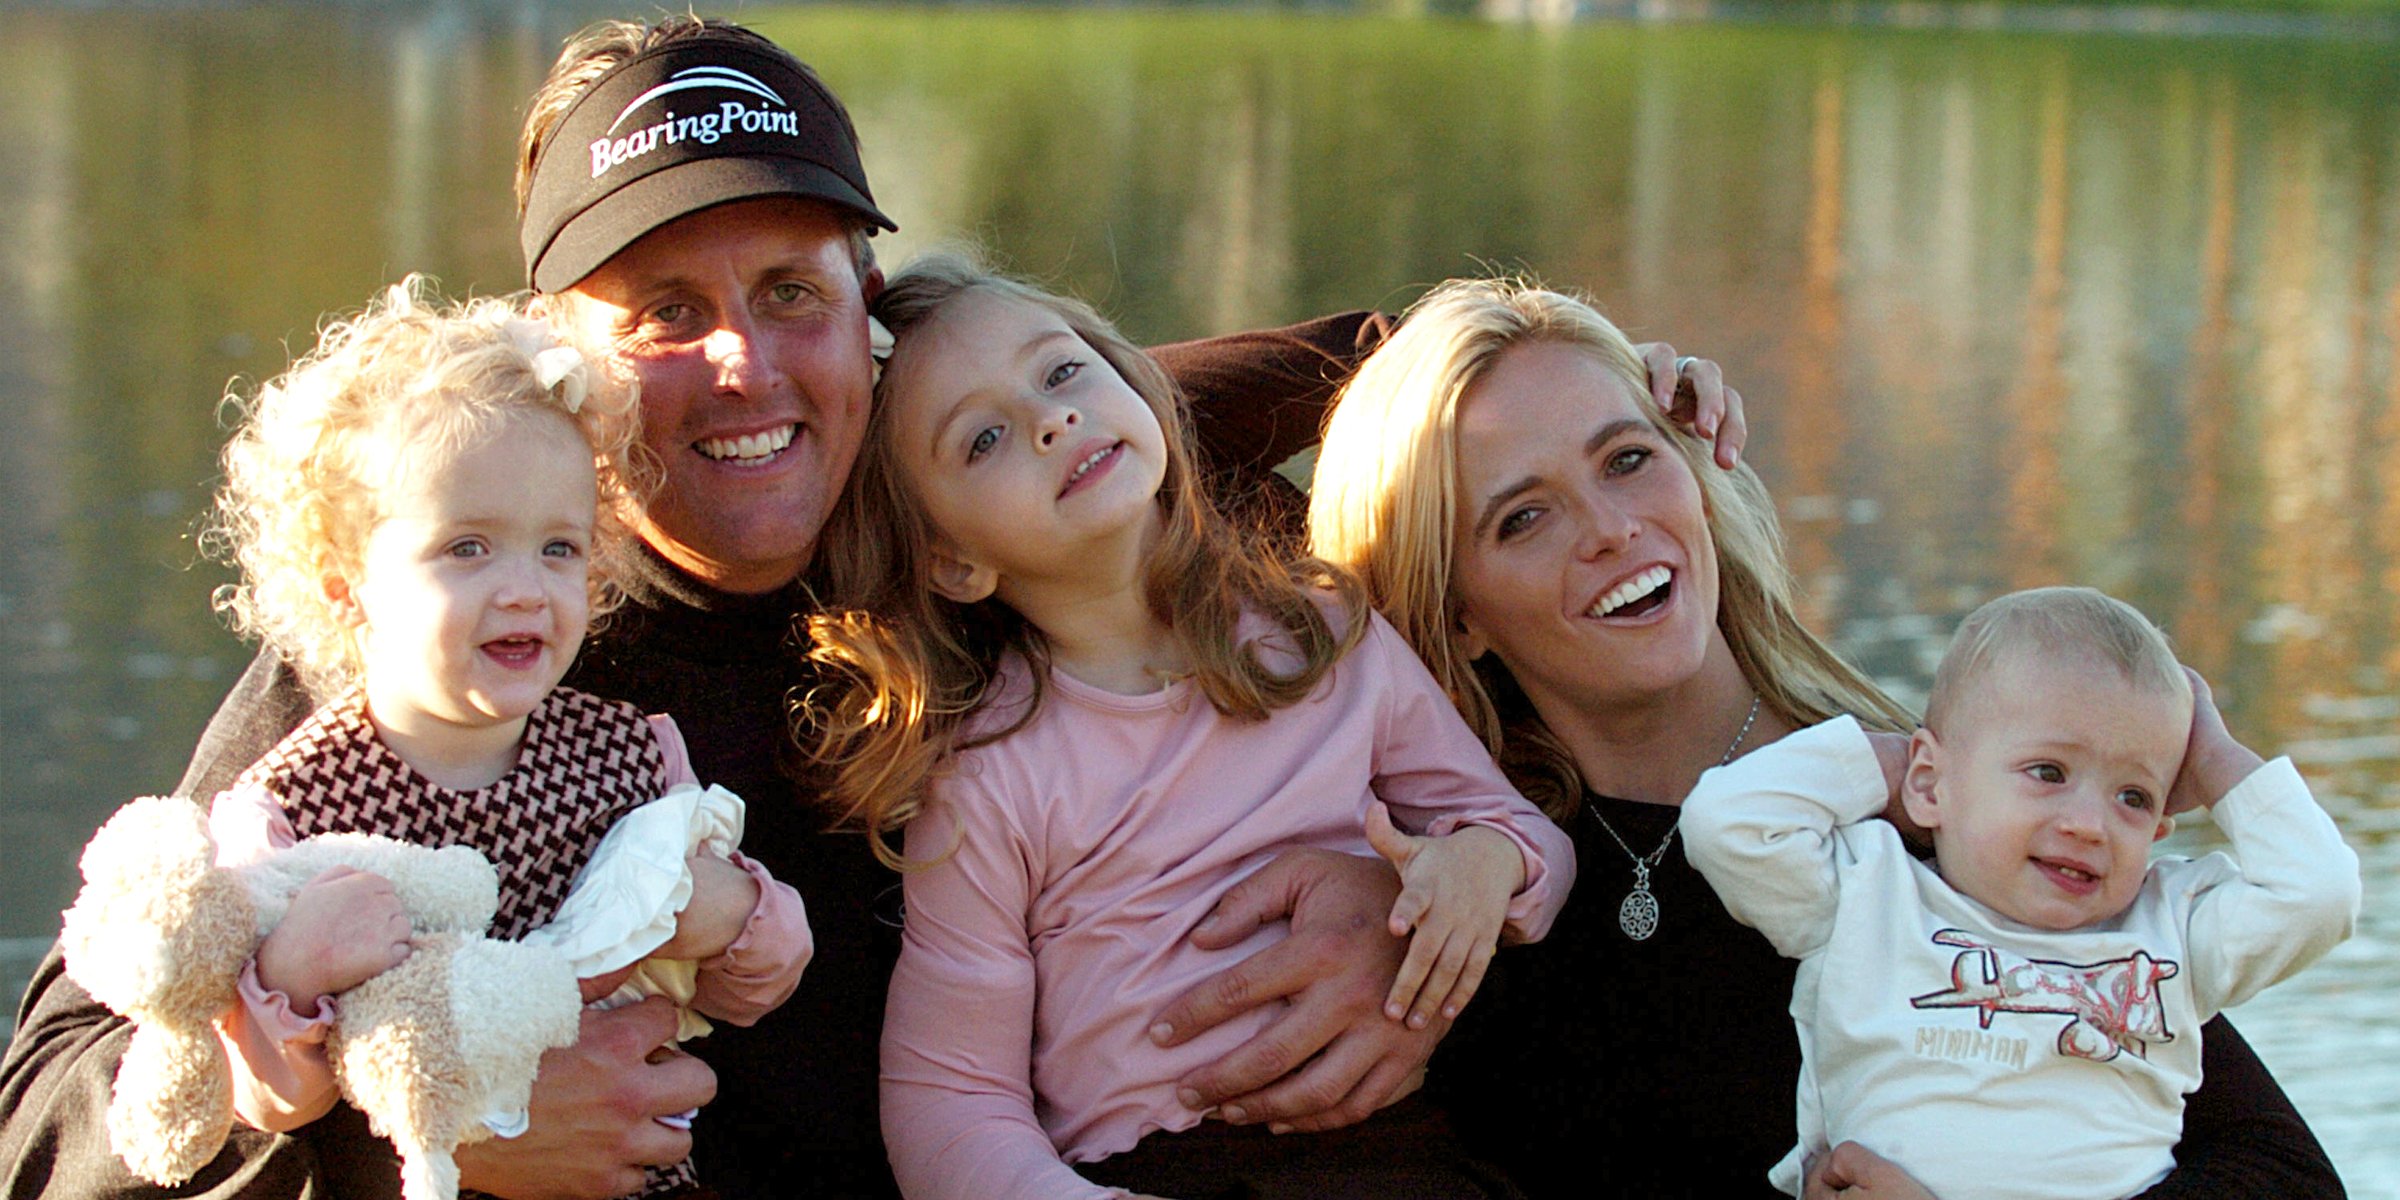 Phil and Amy Mickelson and their three children | Source: Getty Images